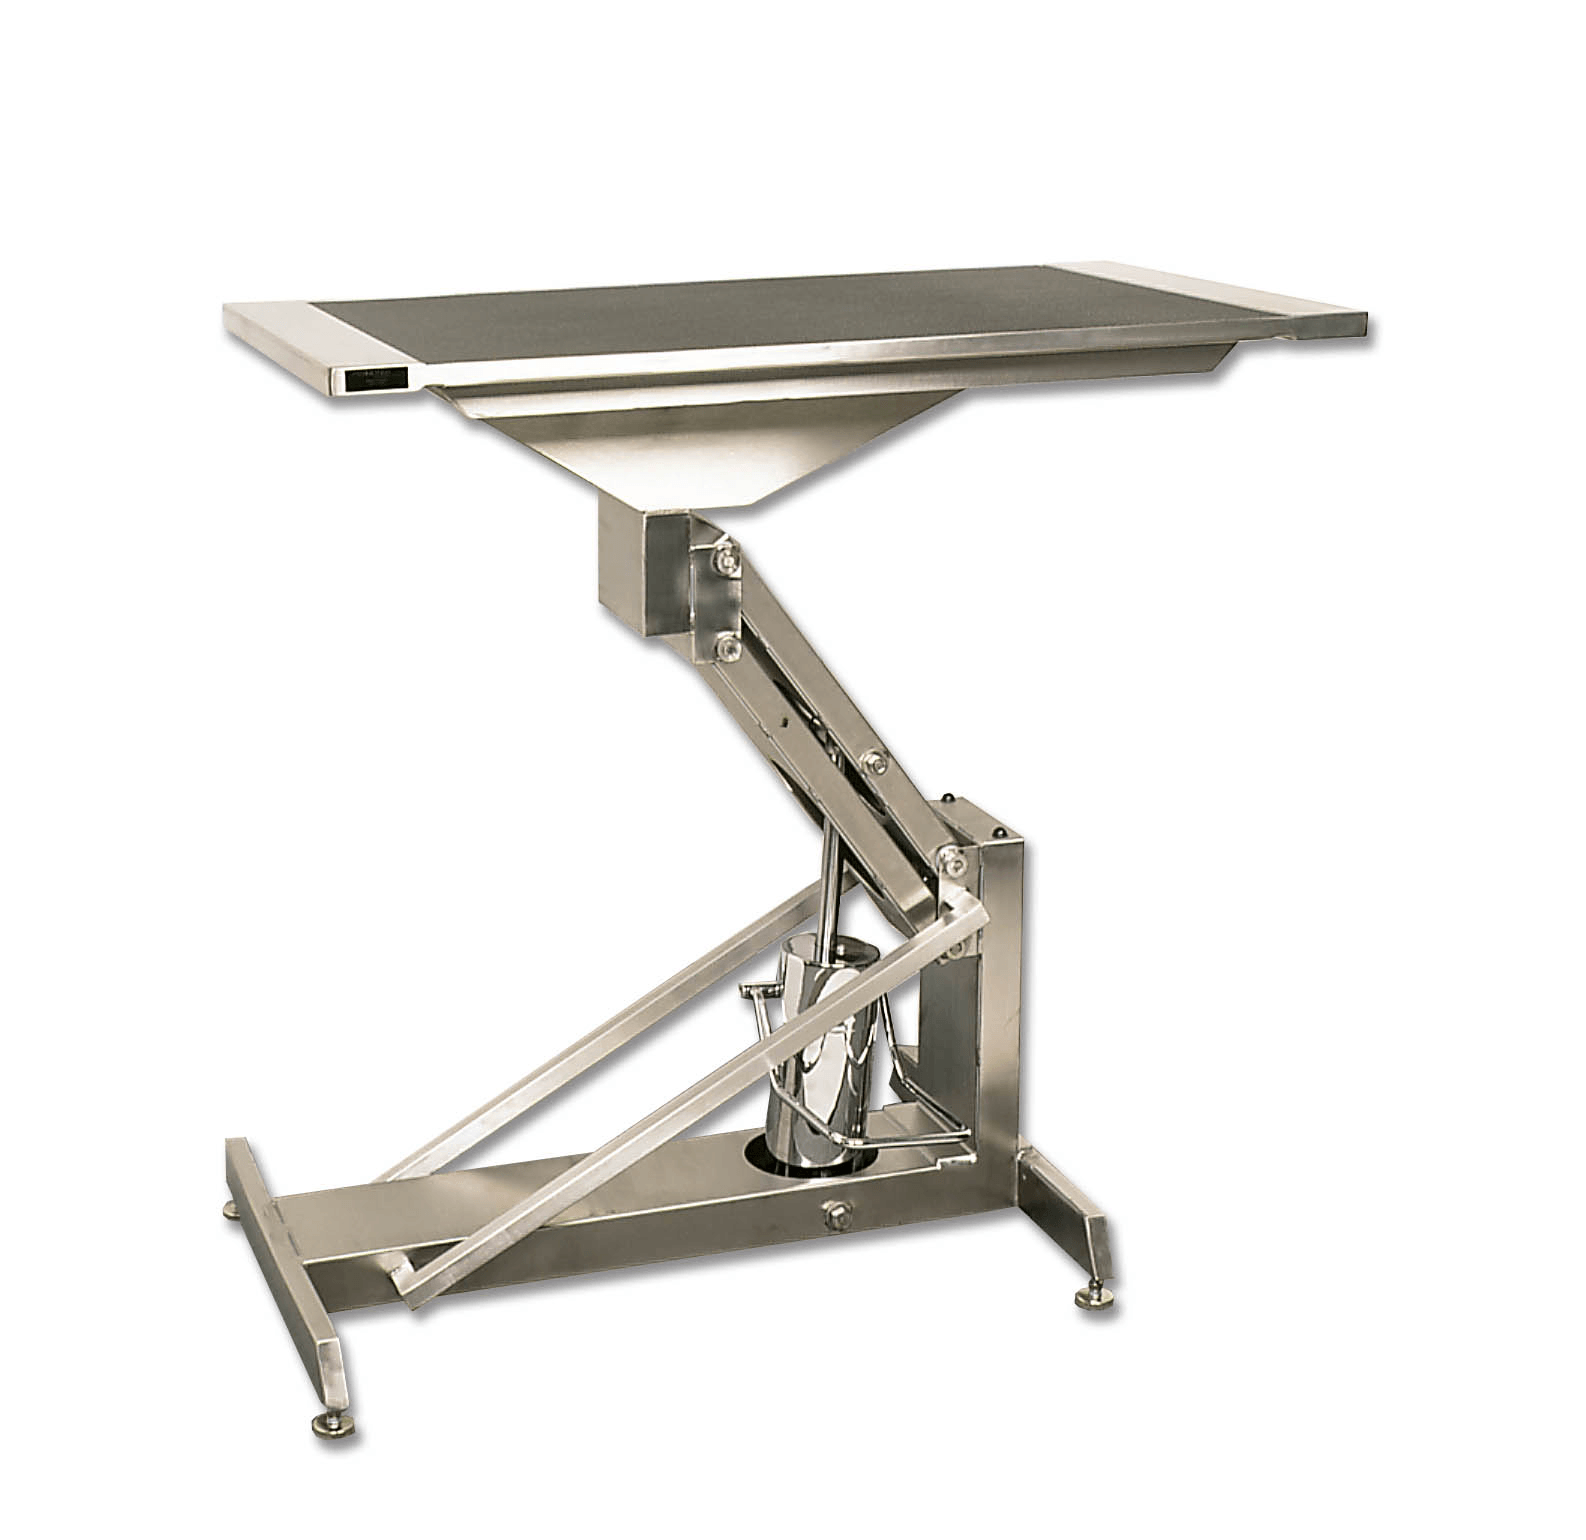 Articulated lift table